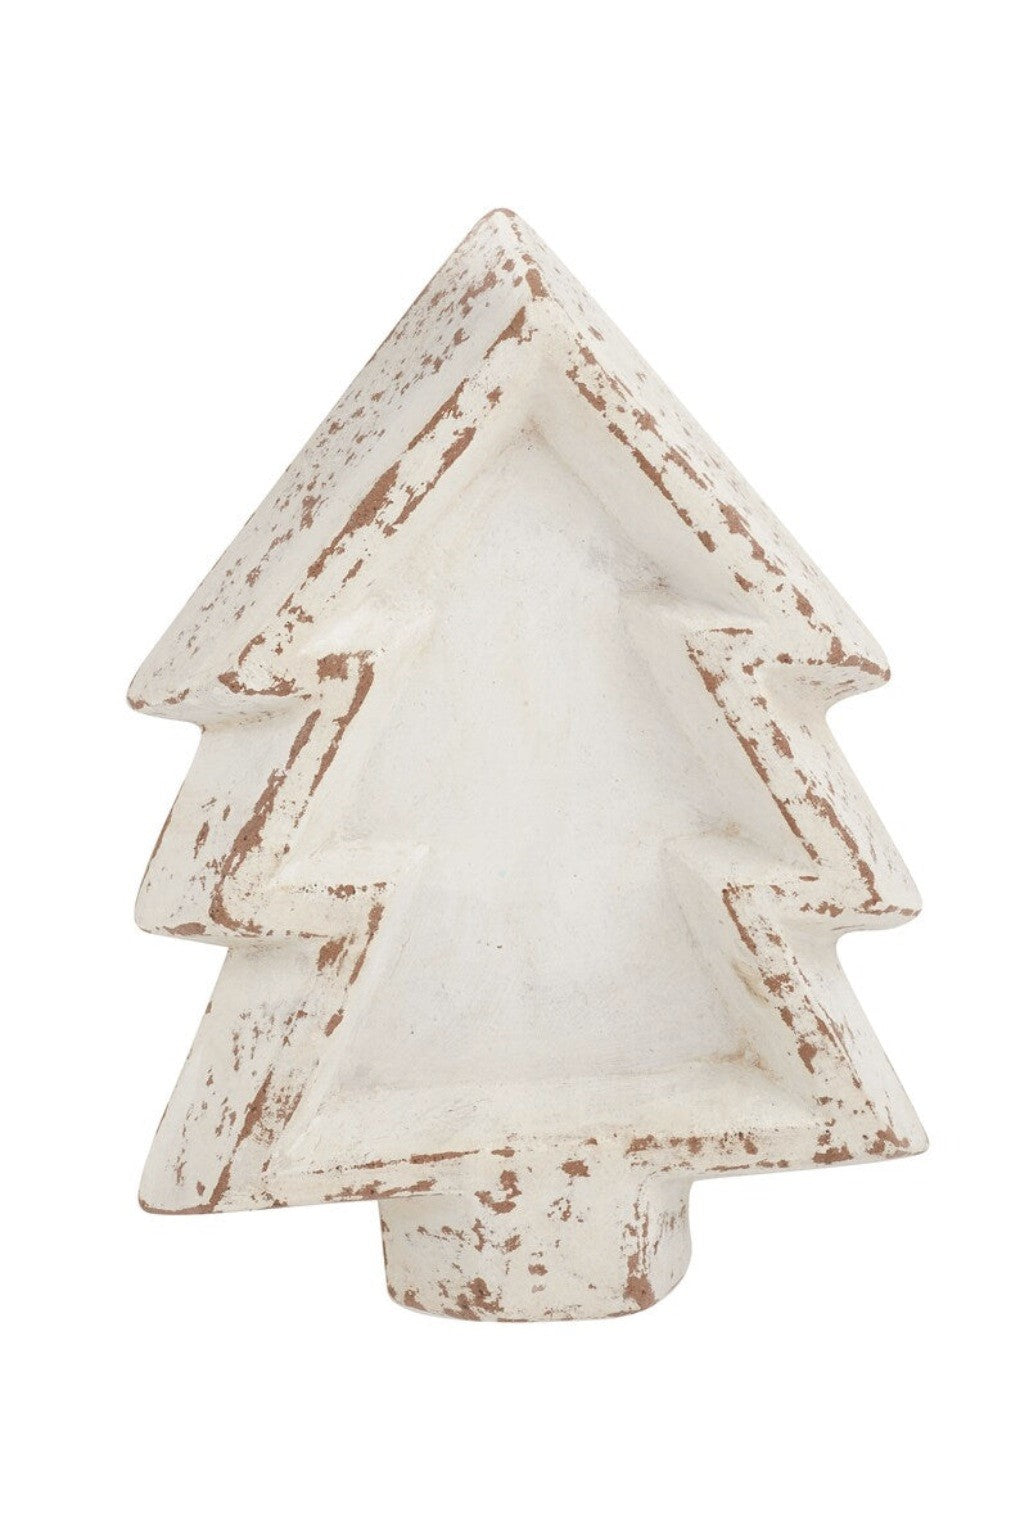 14" Clay Christmas Tree | Holiday Decor Piece | vessel for candle pouring. Candle not included